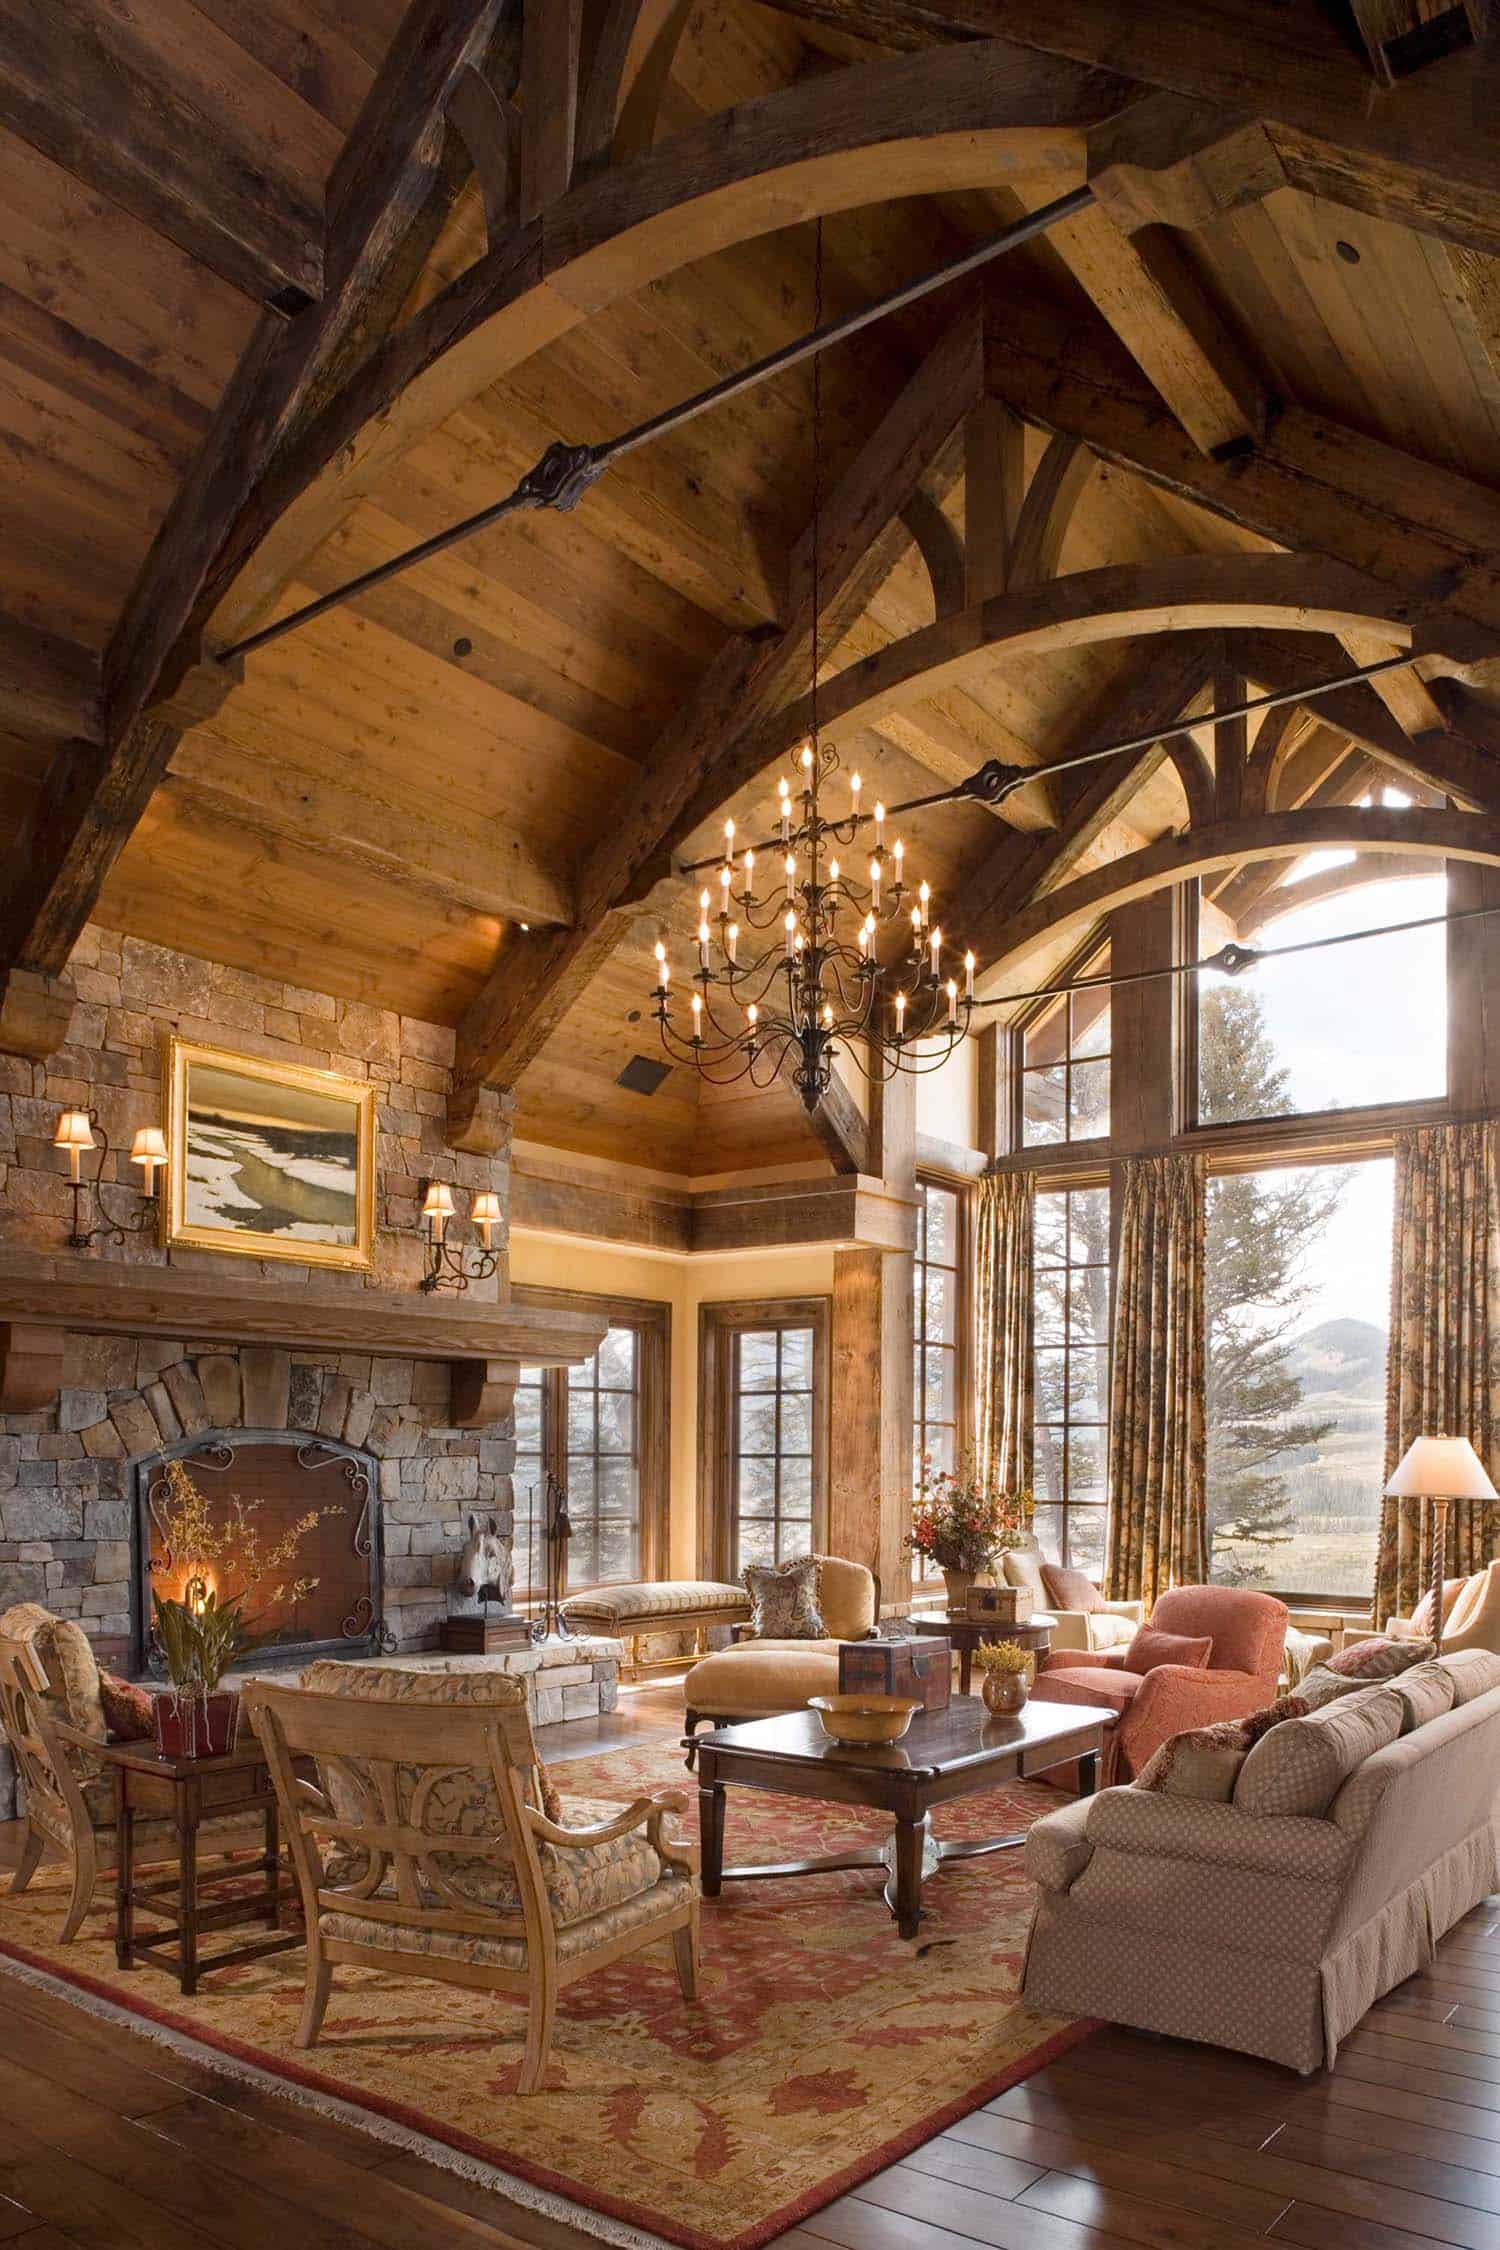 Exquisite Big Sky mountain retreat with timeless details